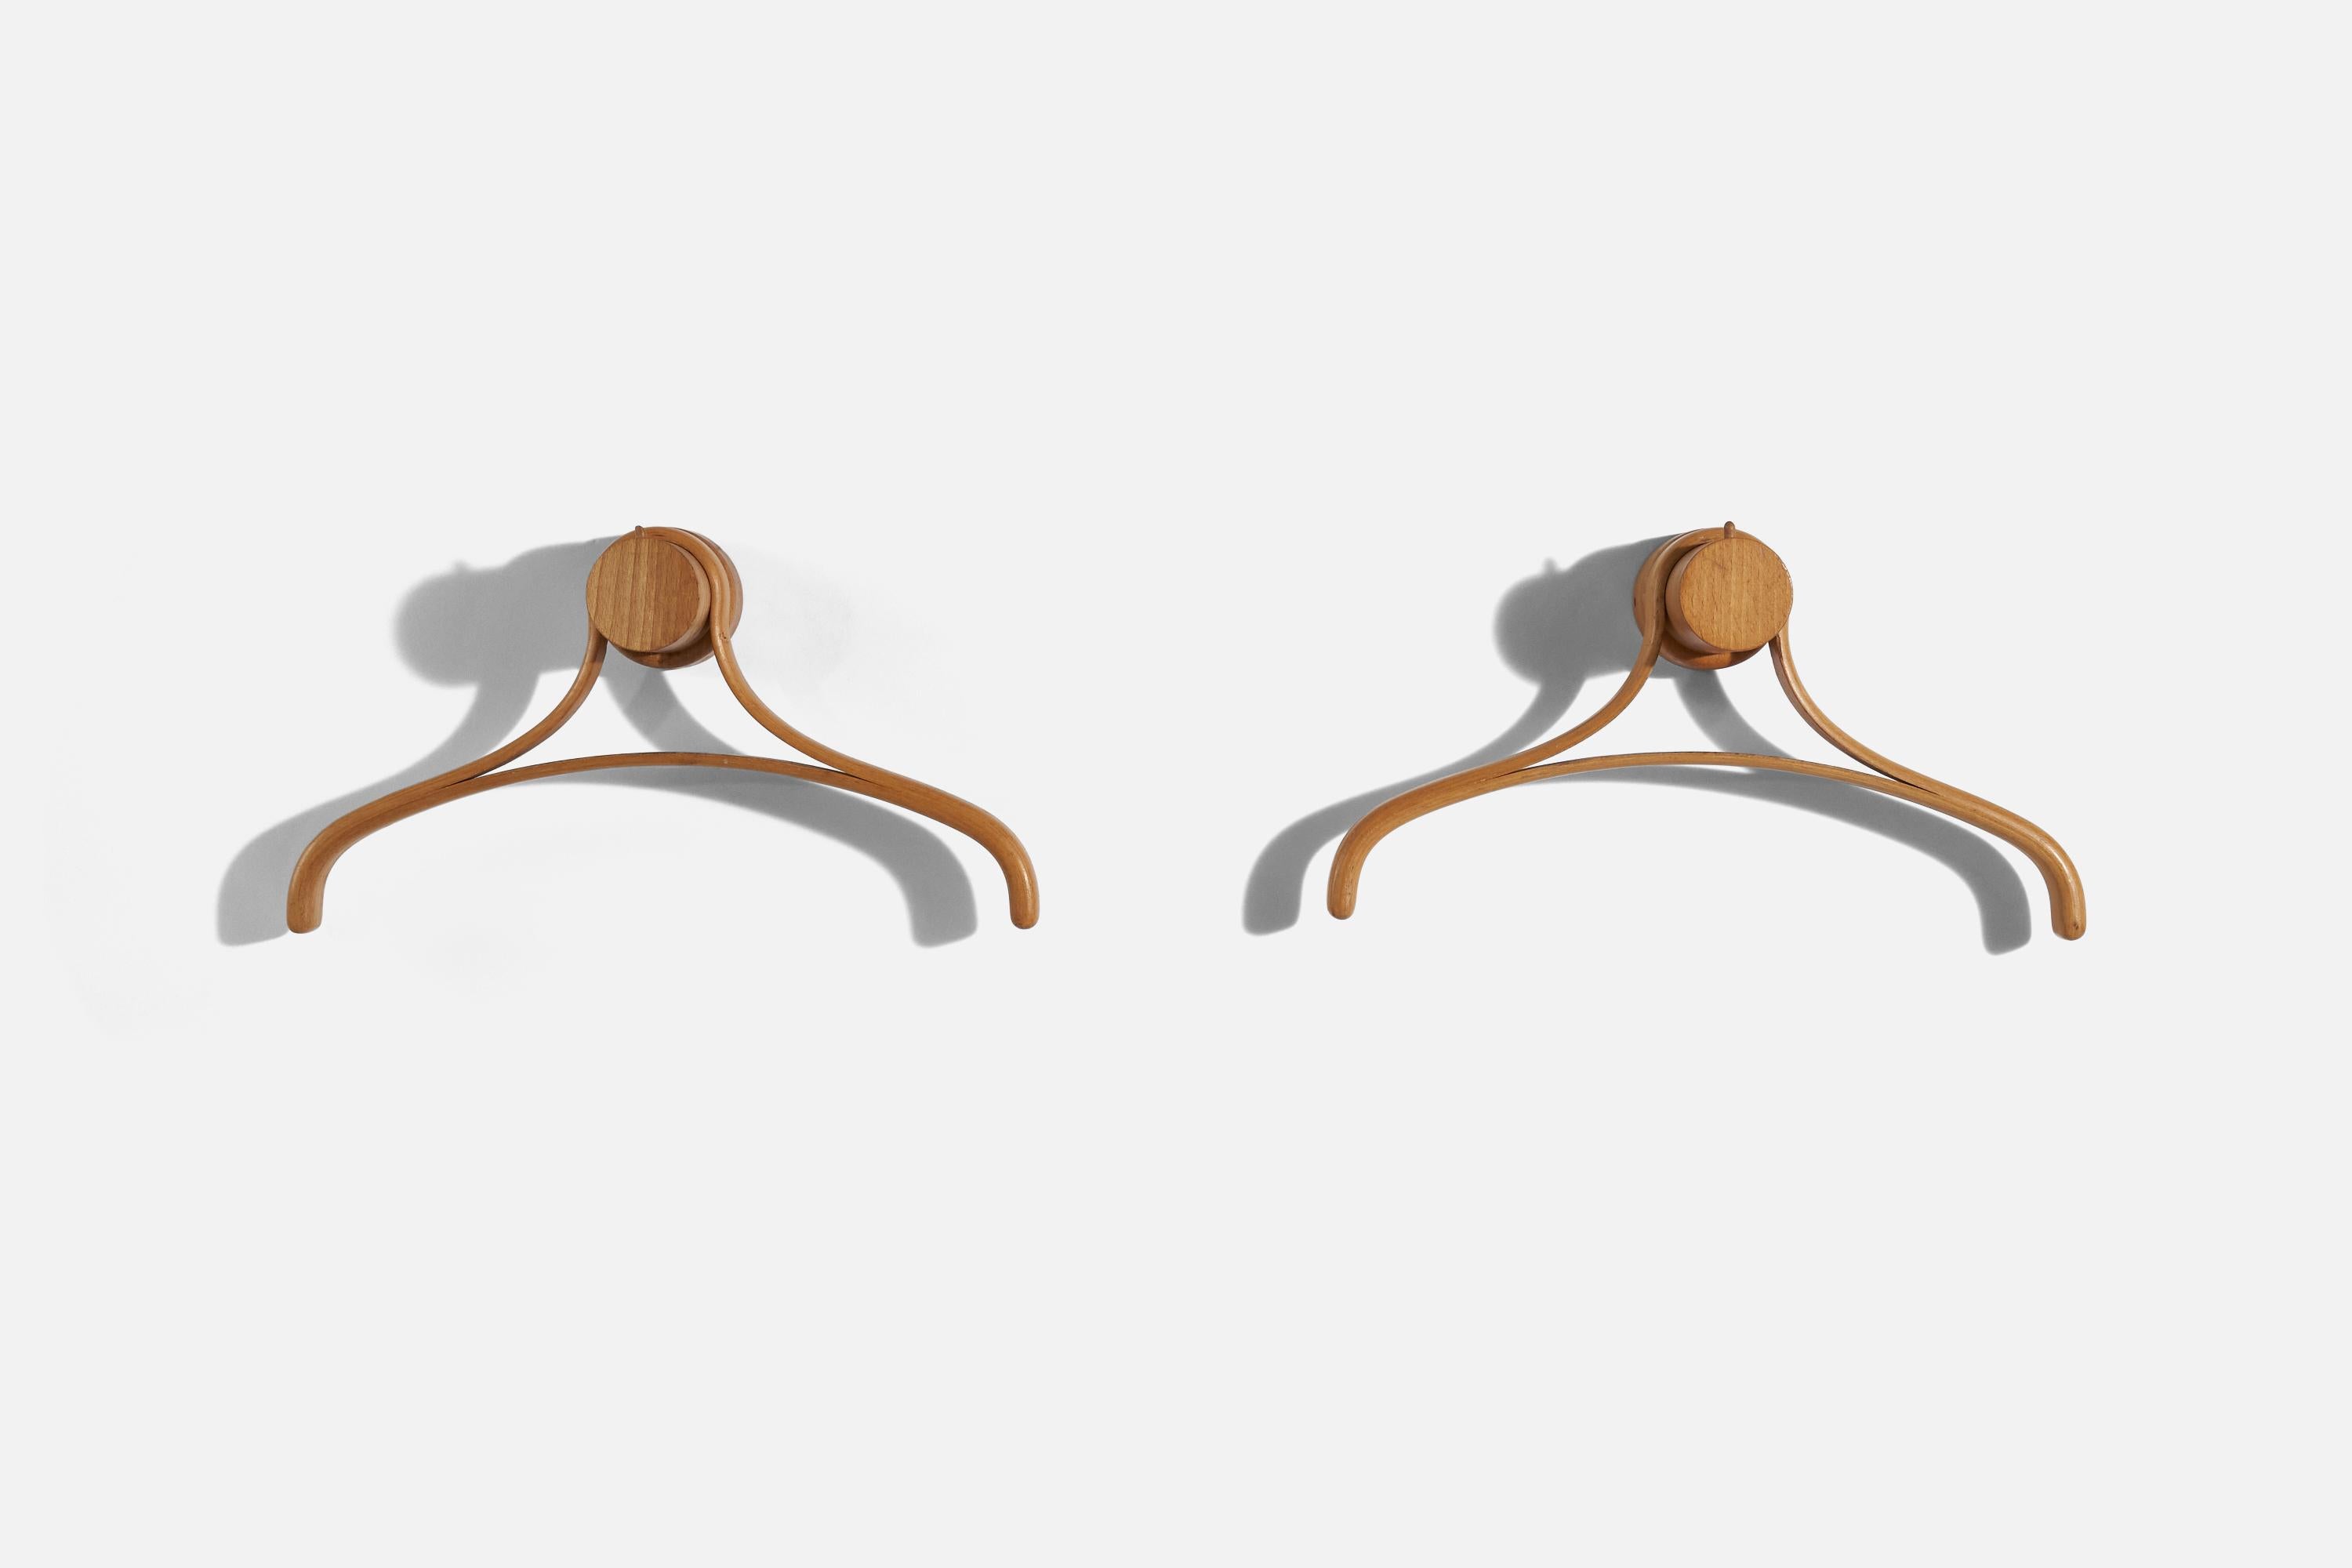 A pair of oak coat hangers, designed and produced by an Italian designer, Italy, 1960s.